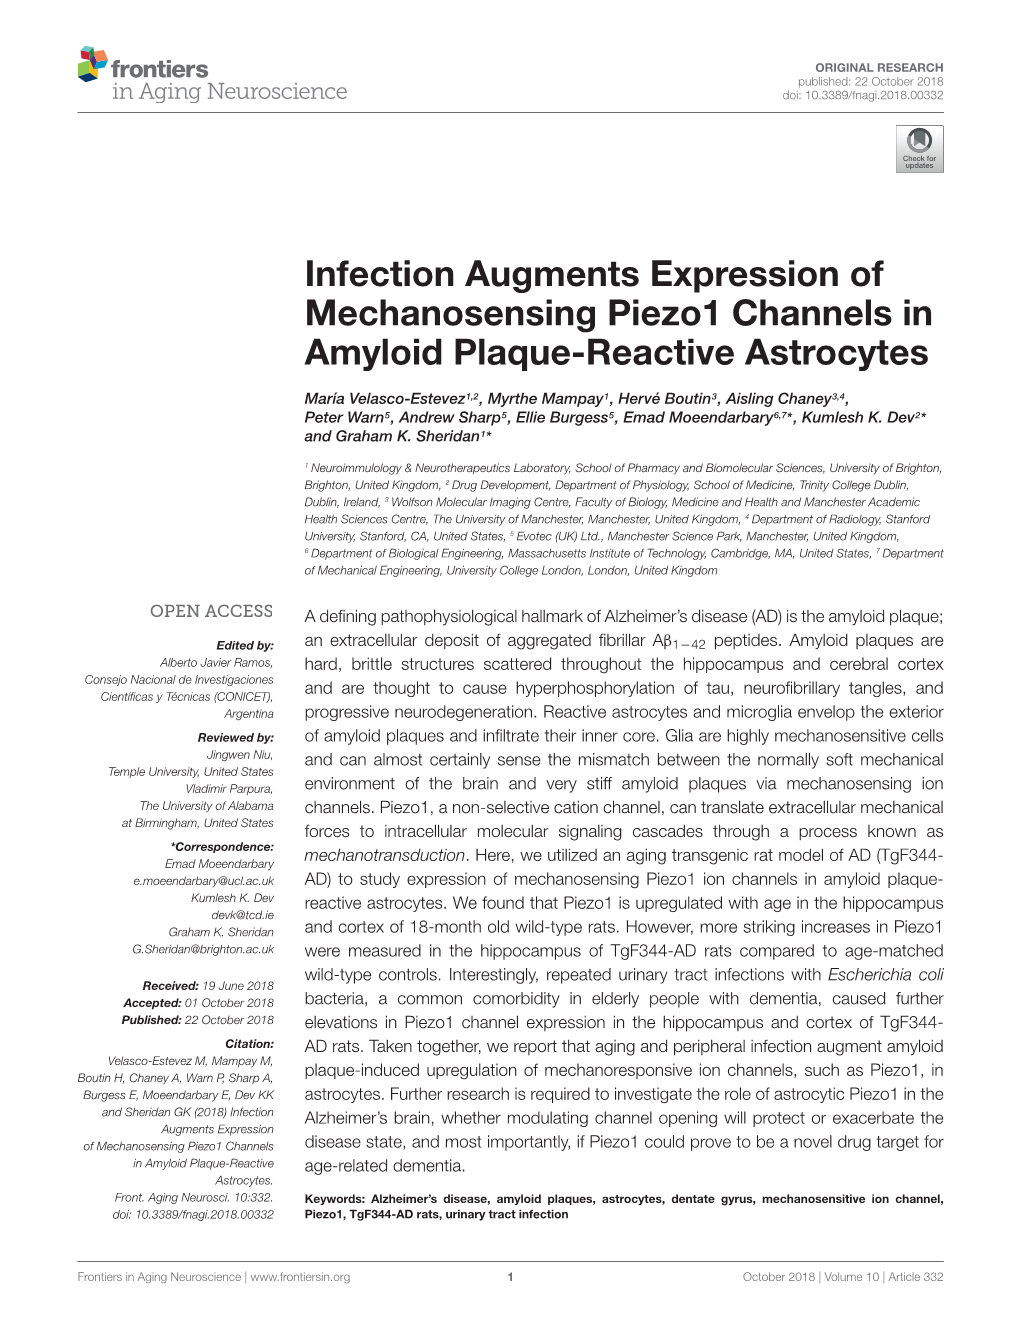 Infection Augments Expression of Mechanosensing Piezo1 Channels in Amyloid Plaque-Reactive Astrocytes